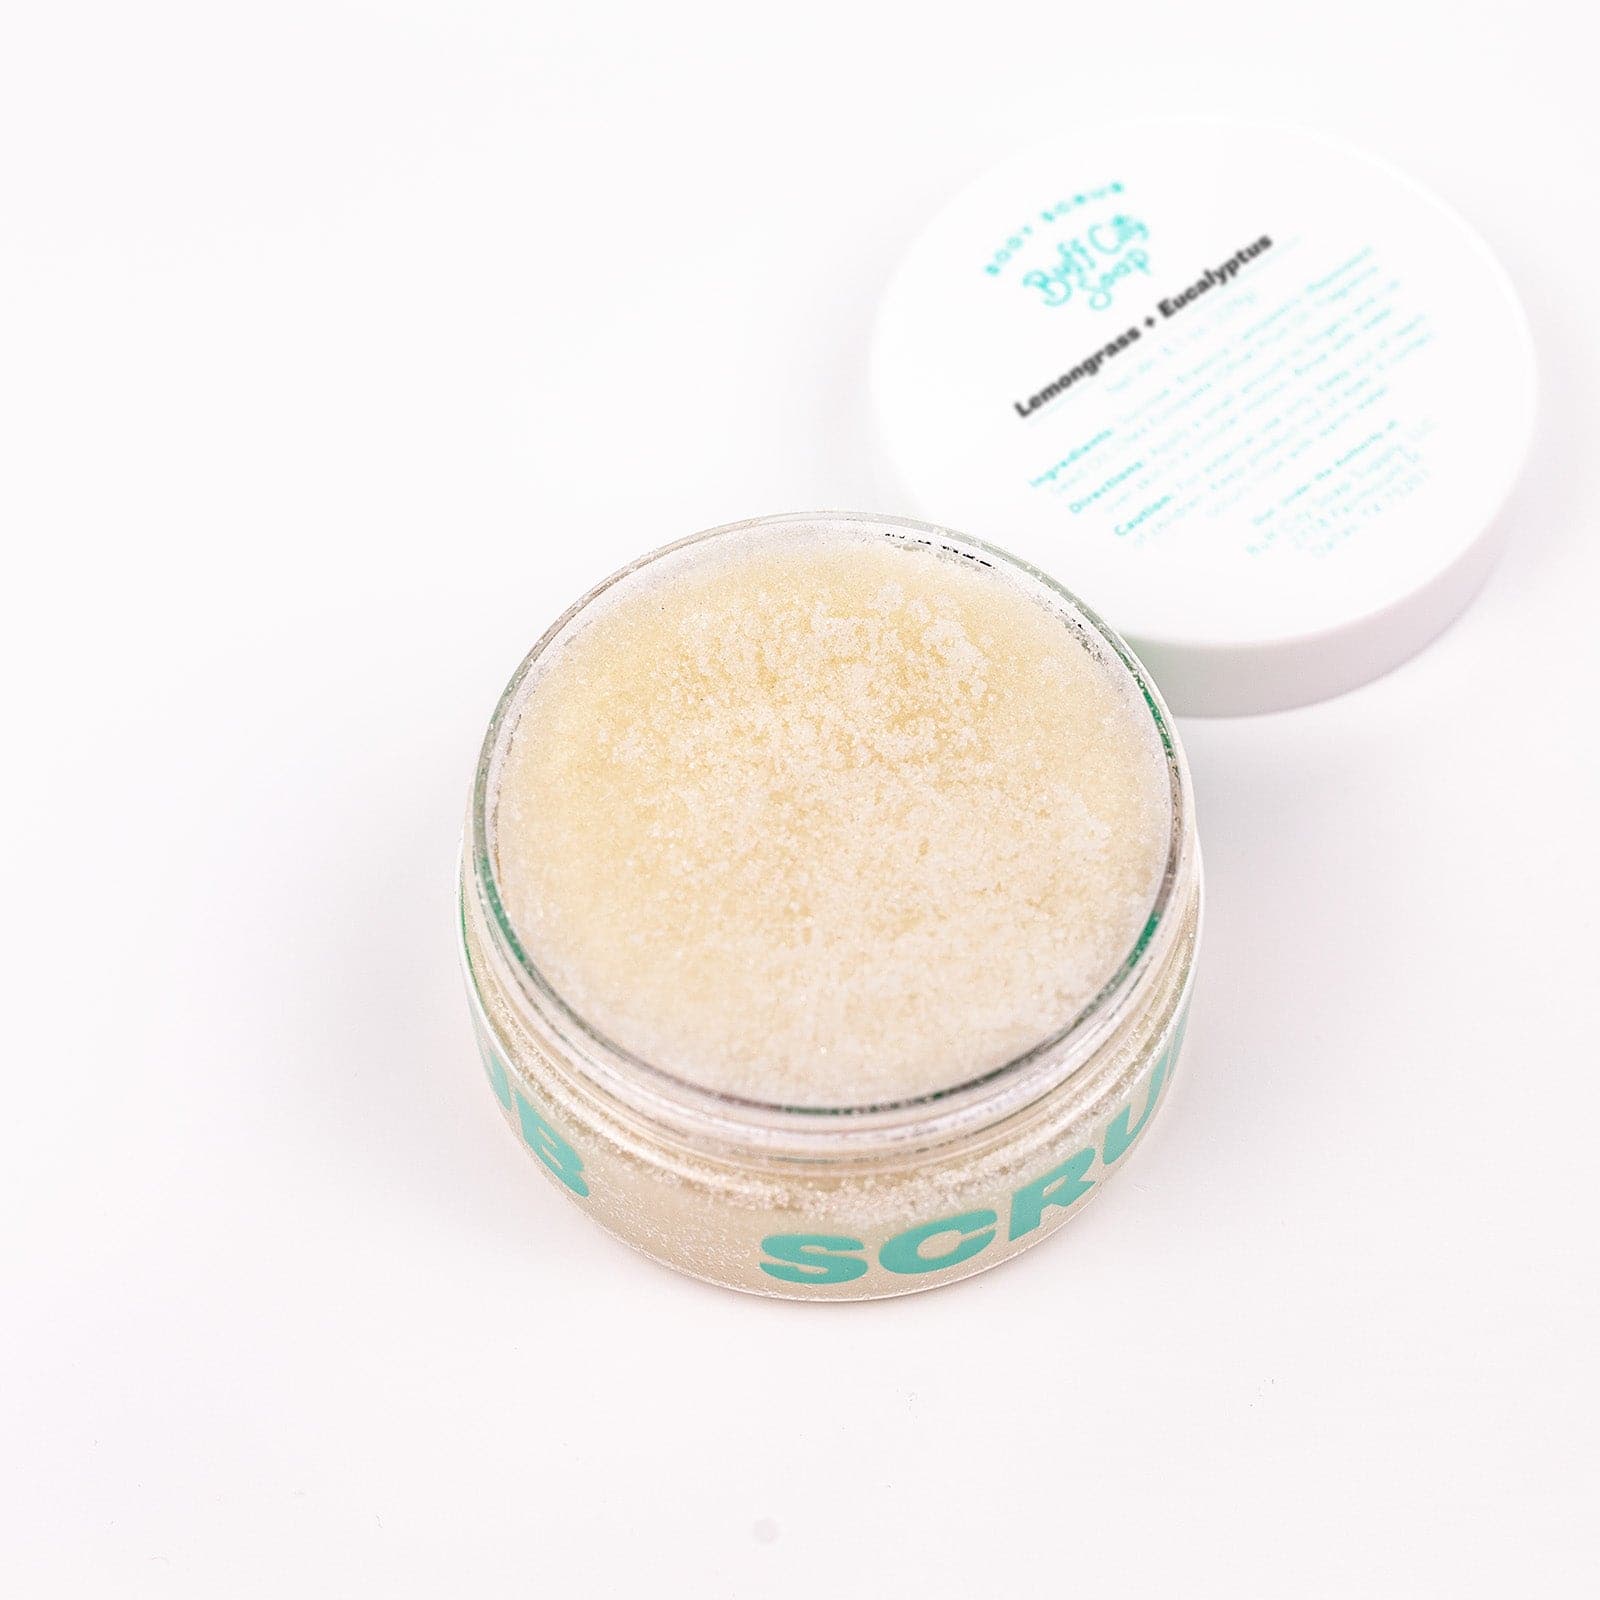 Buff City Soap's lemongrass + eucalyptus scented body scrub can open with the lid next to it